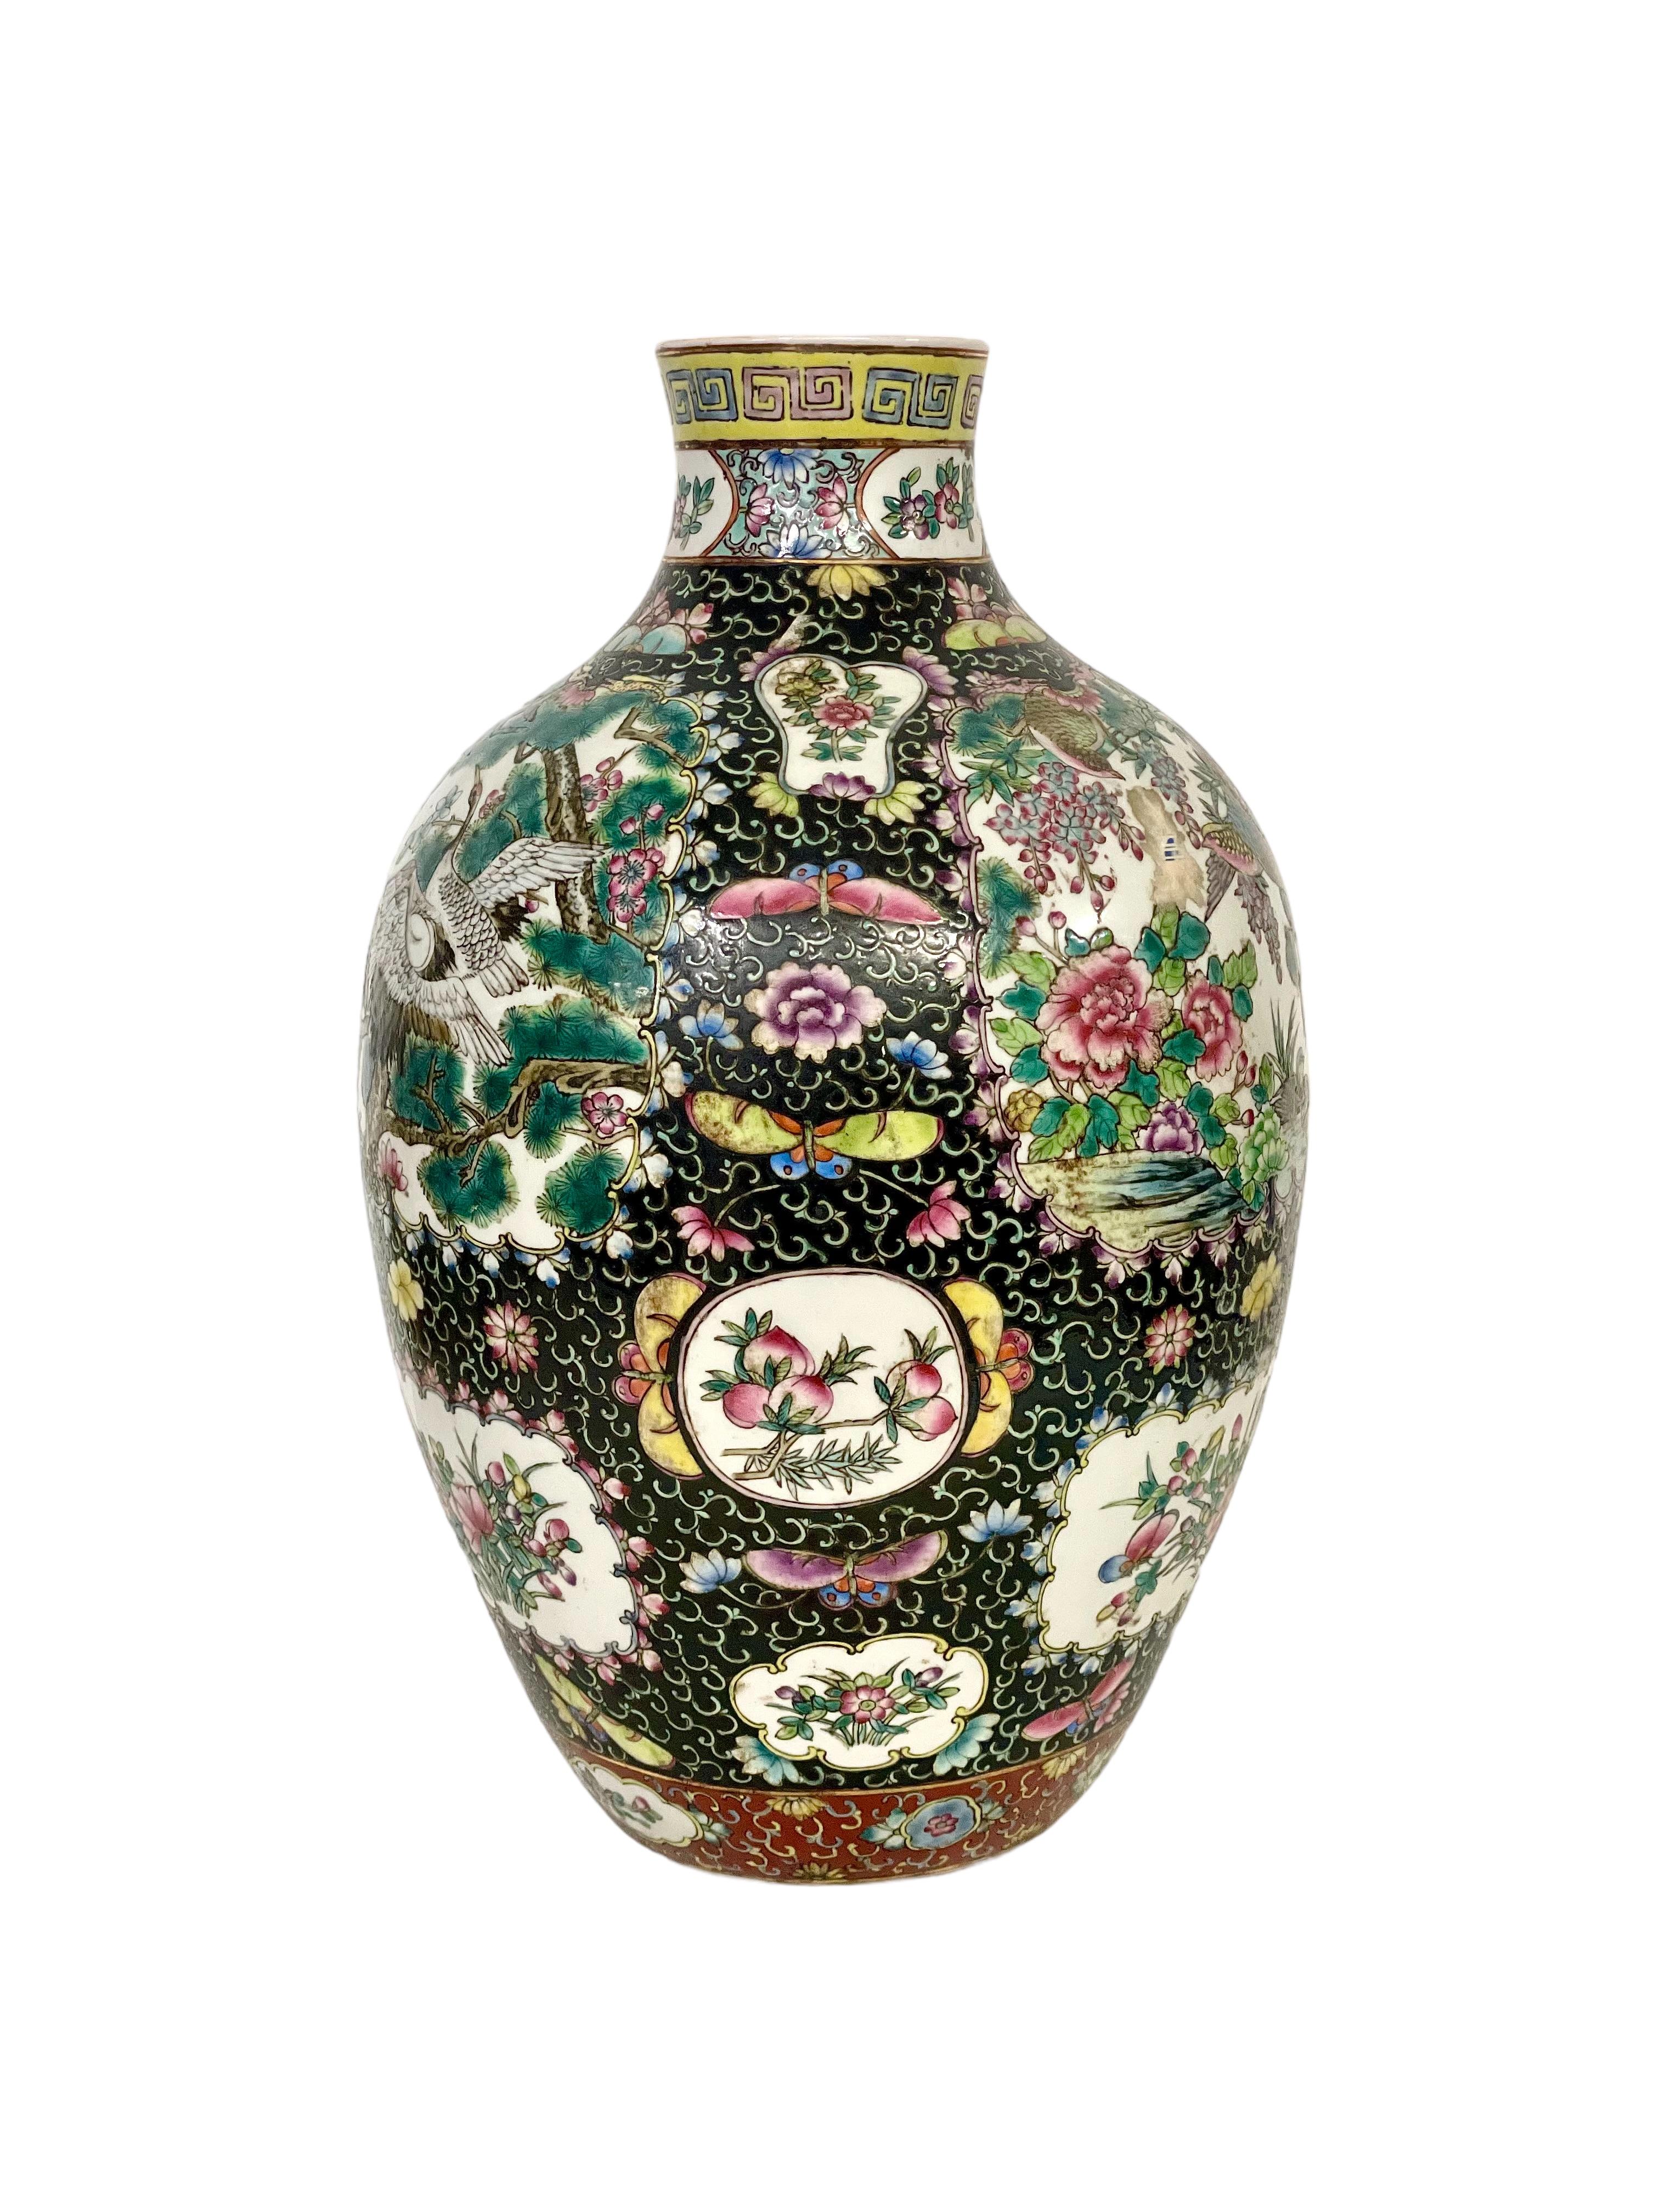 A large and imposing antique Chinese 'Famille Noire' porcelain vase, intricately decorated all over with vibrantly coloured butterflies, blossoms and birds, including a crane and a phoenix. Its narrow rim is highlighted with a band of bright yellow,